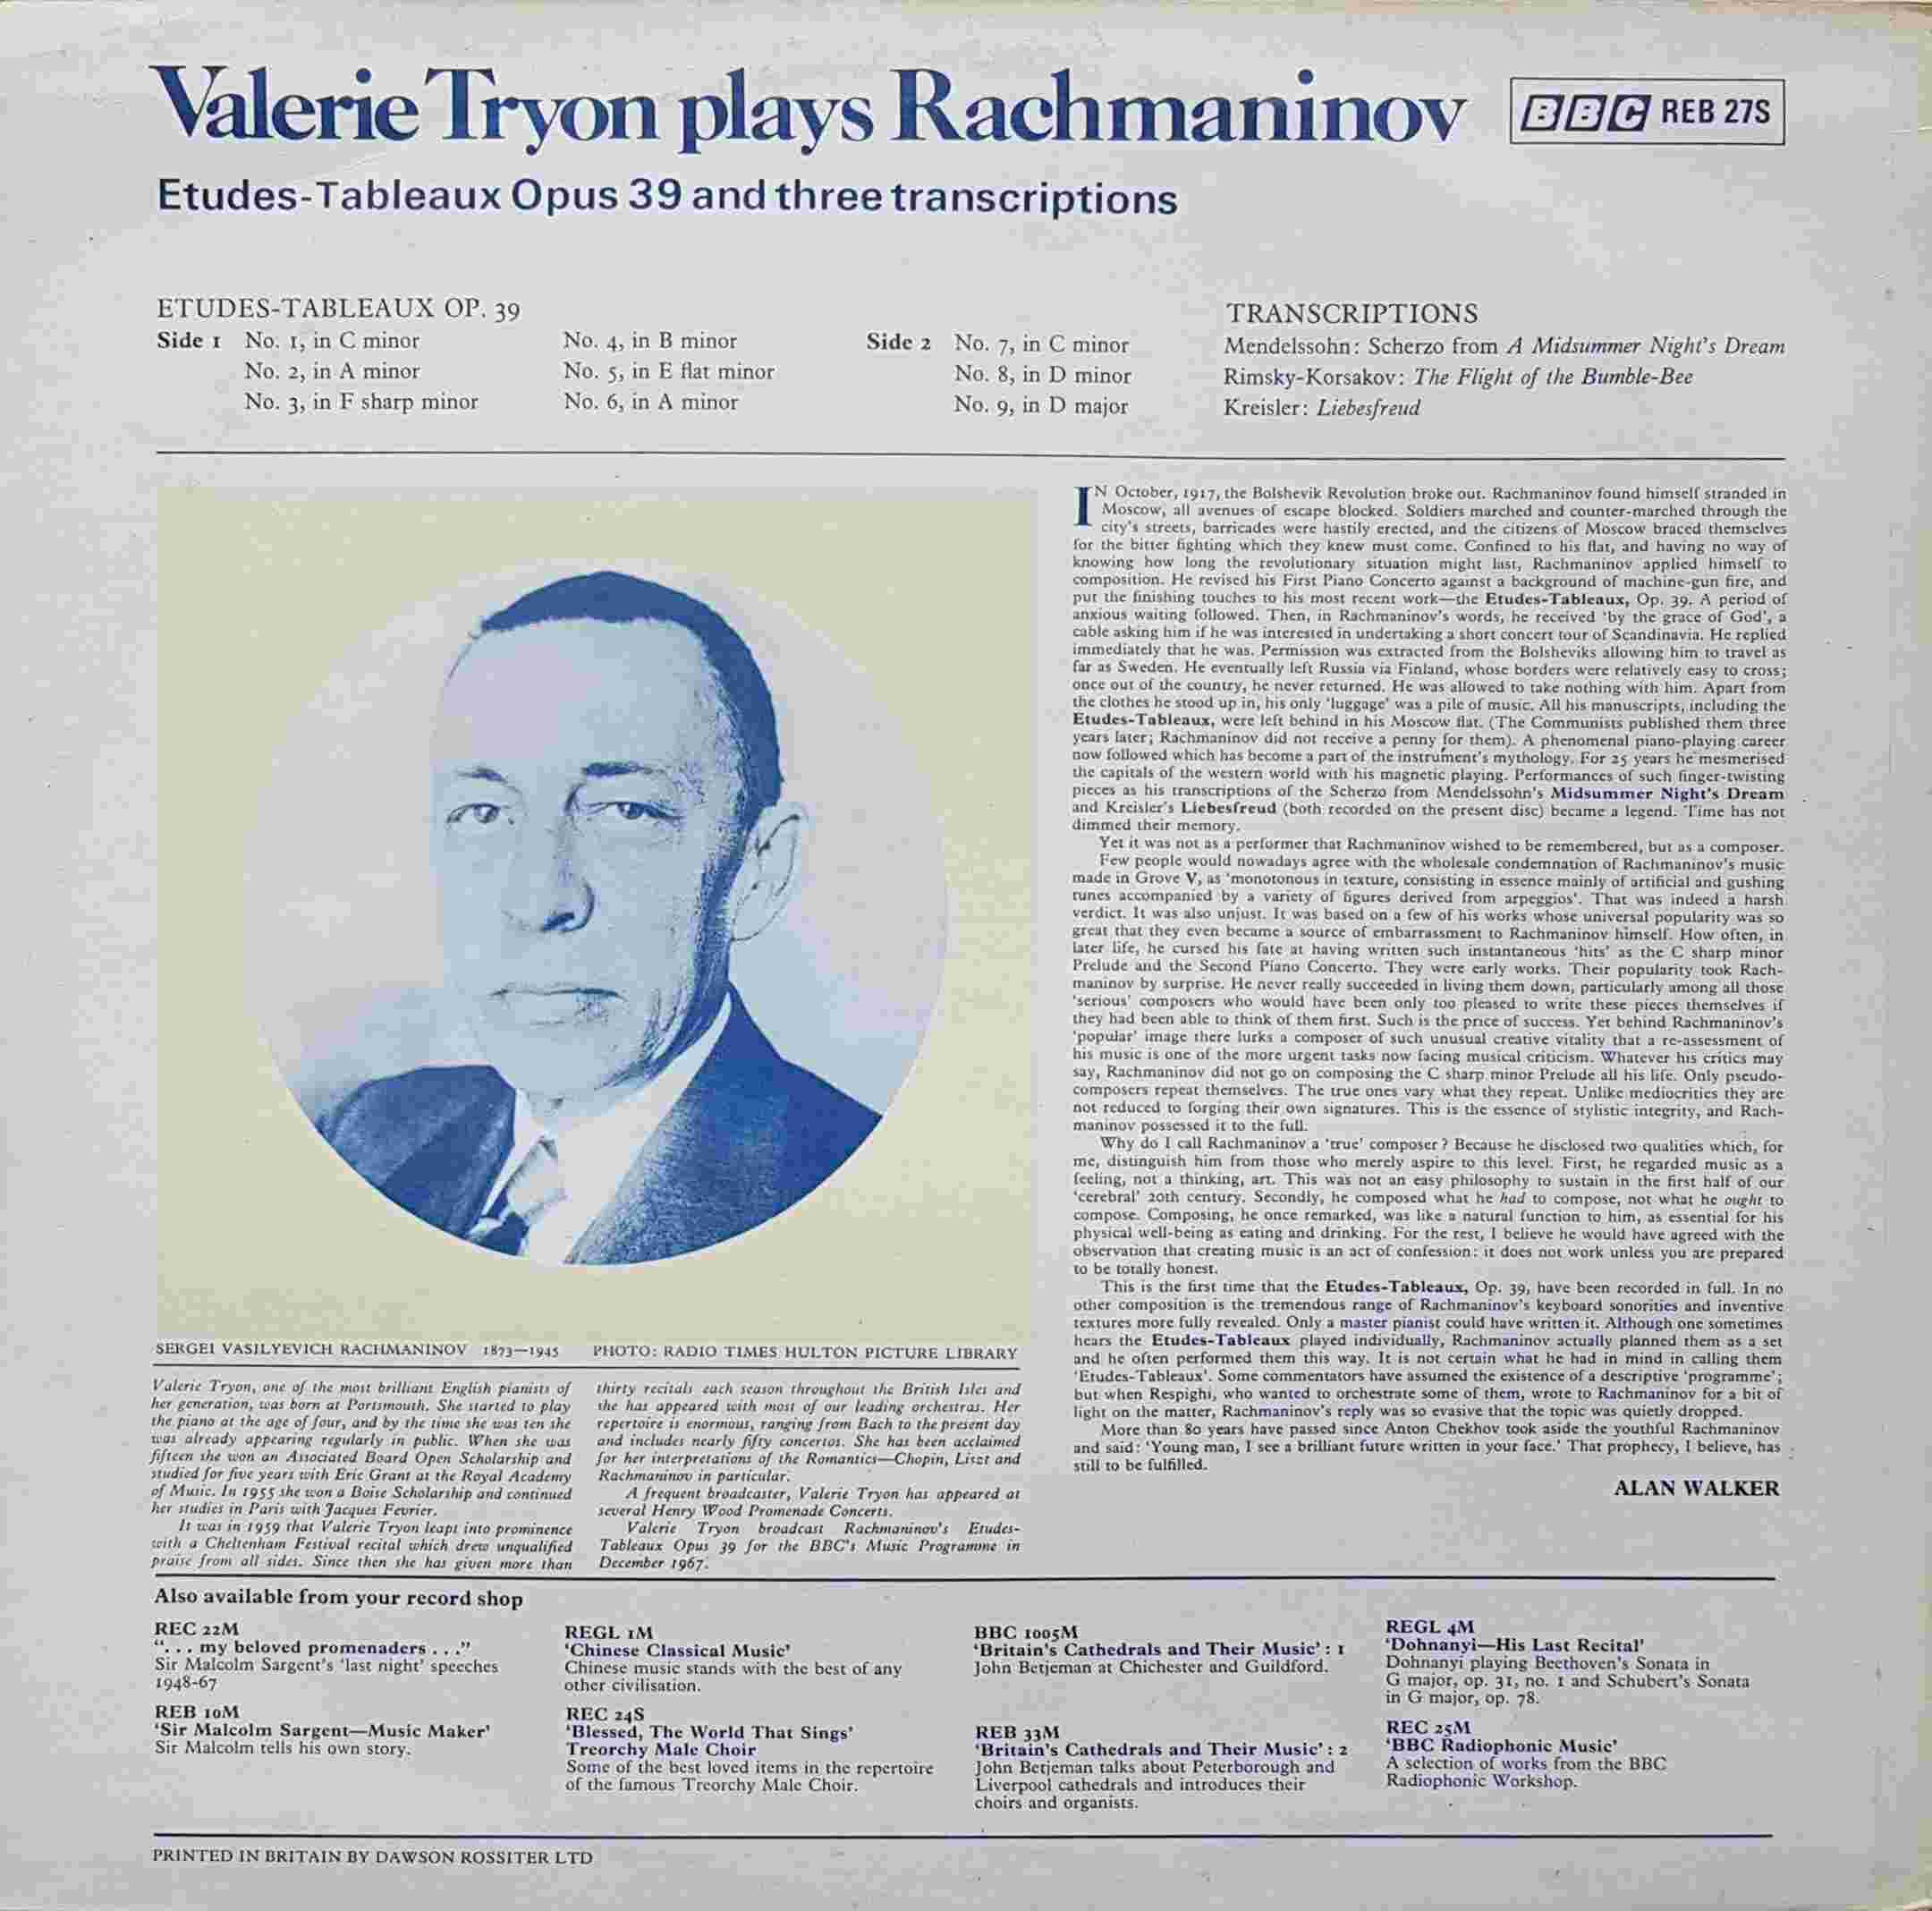 Picture of REB 27 Valerie Tryon plays Rachmaninov by artist Rachmaninov / Valerie Tryon from the BBC records and Tapes library